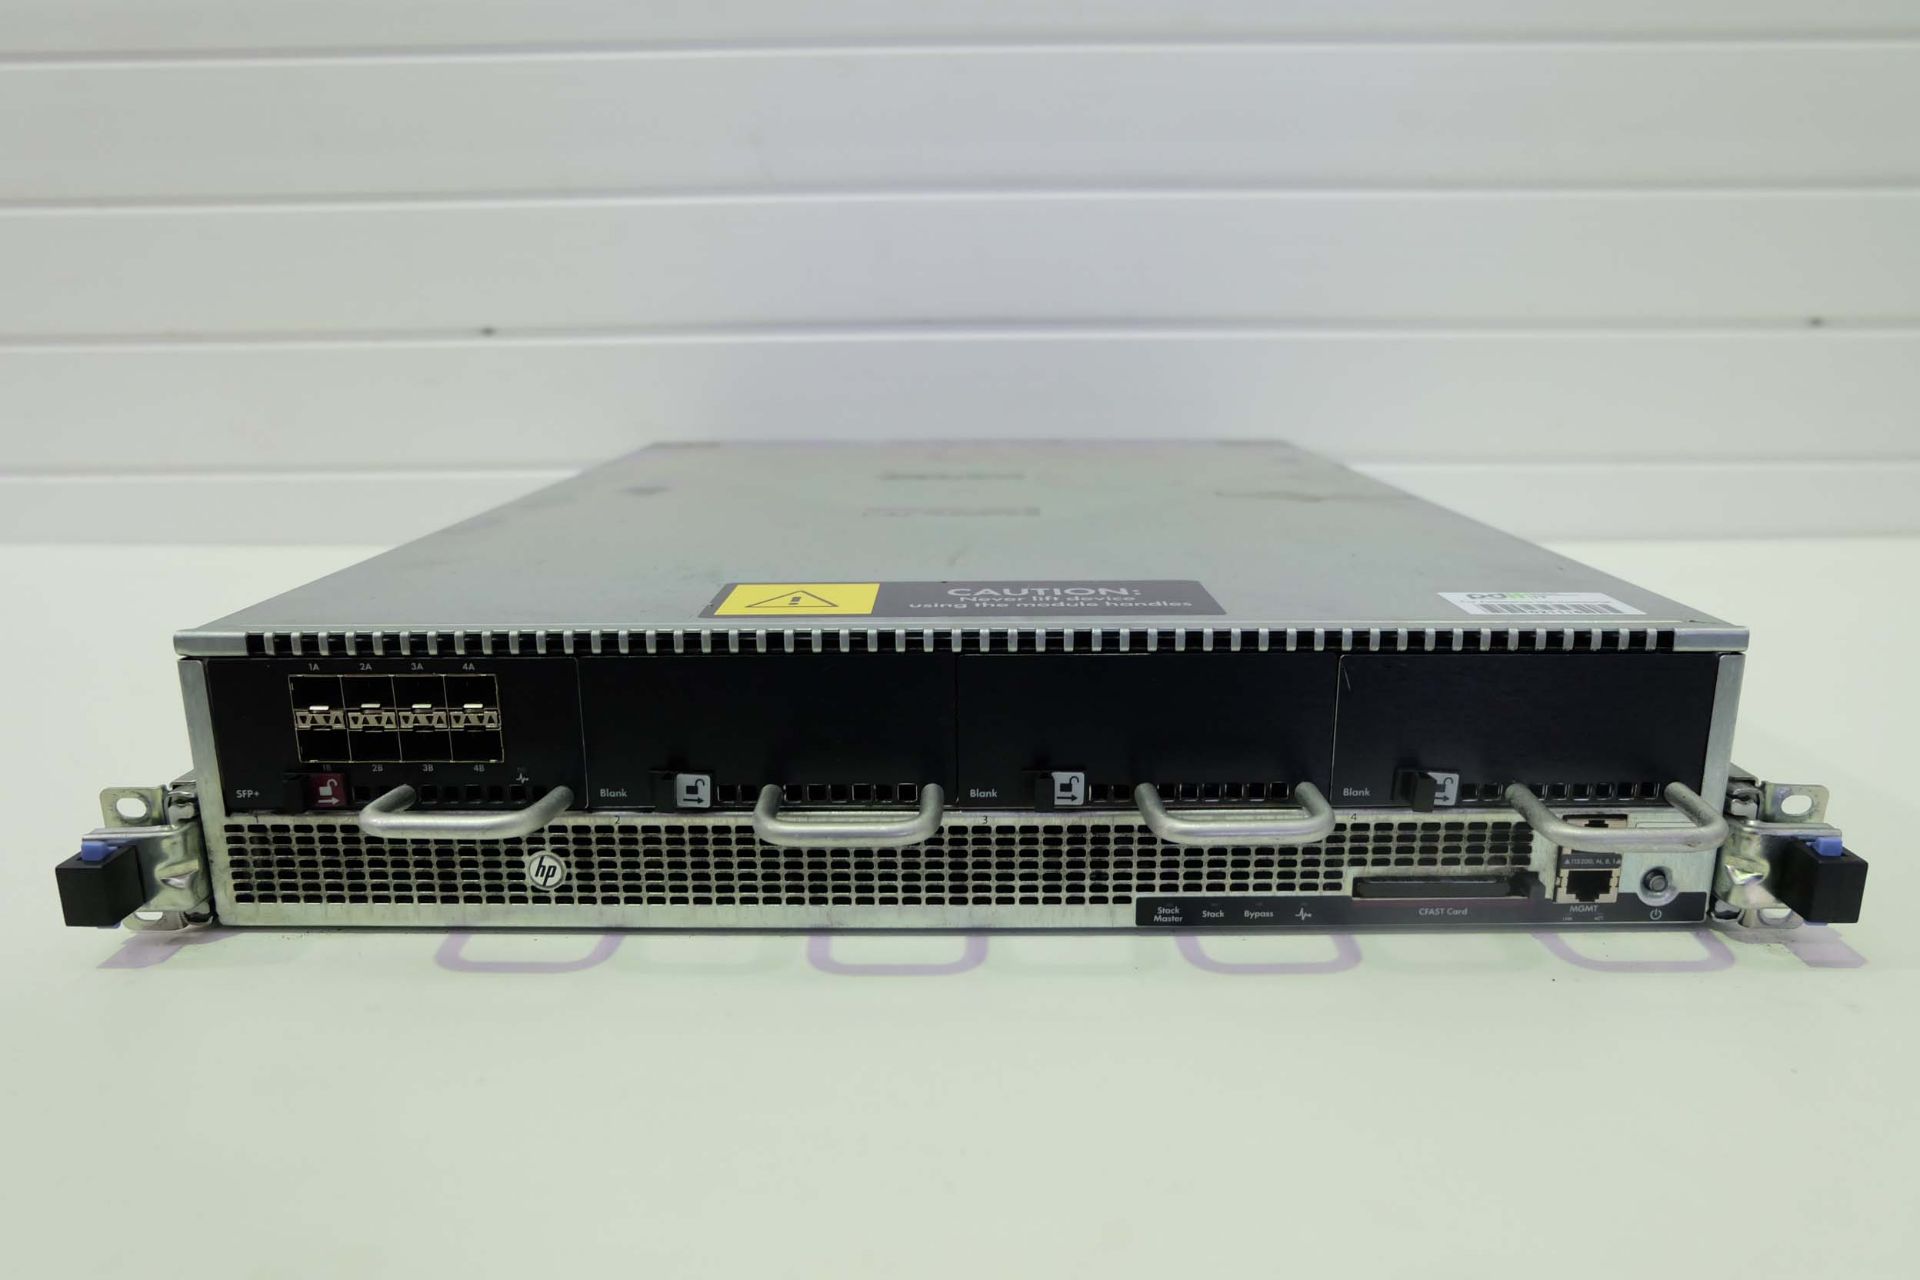 HP Model 6200 NXIPS Product No. JC873A Intrusion Prevention System